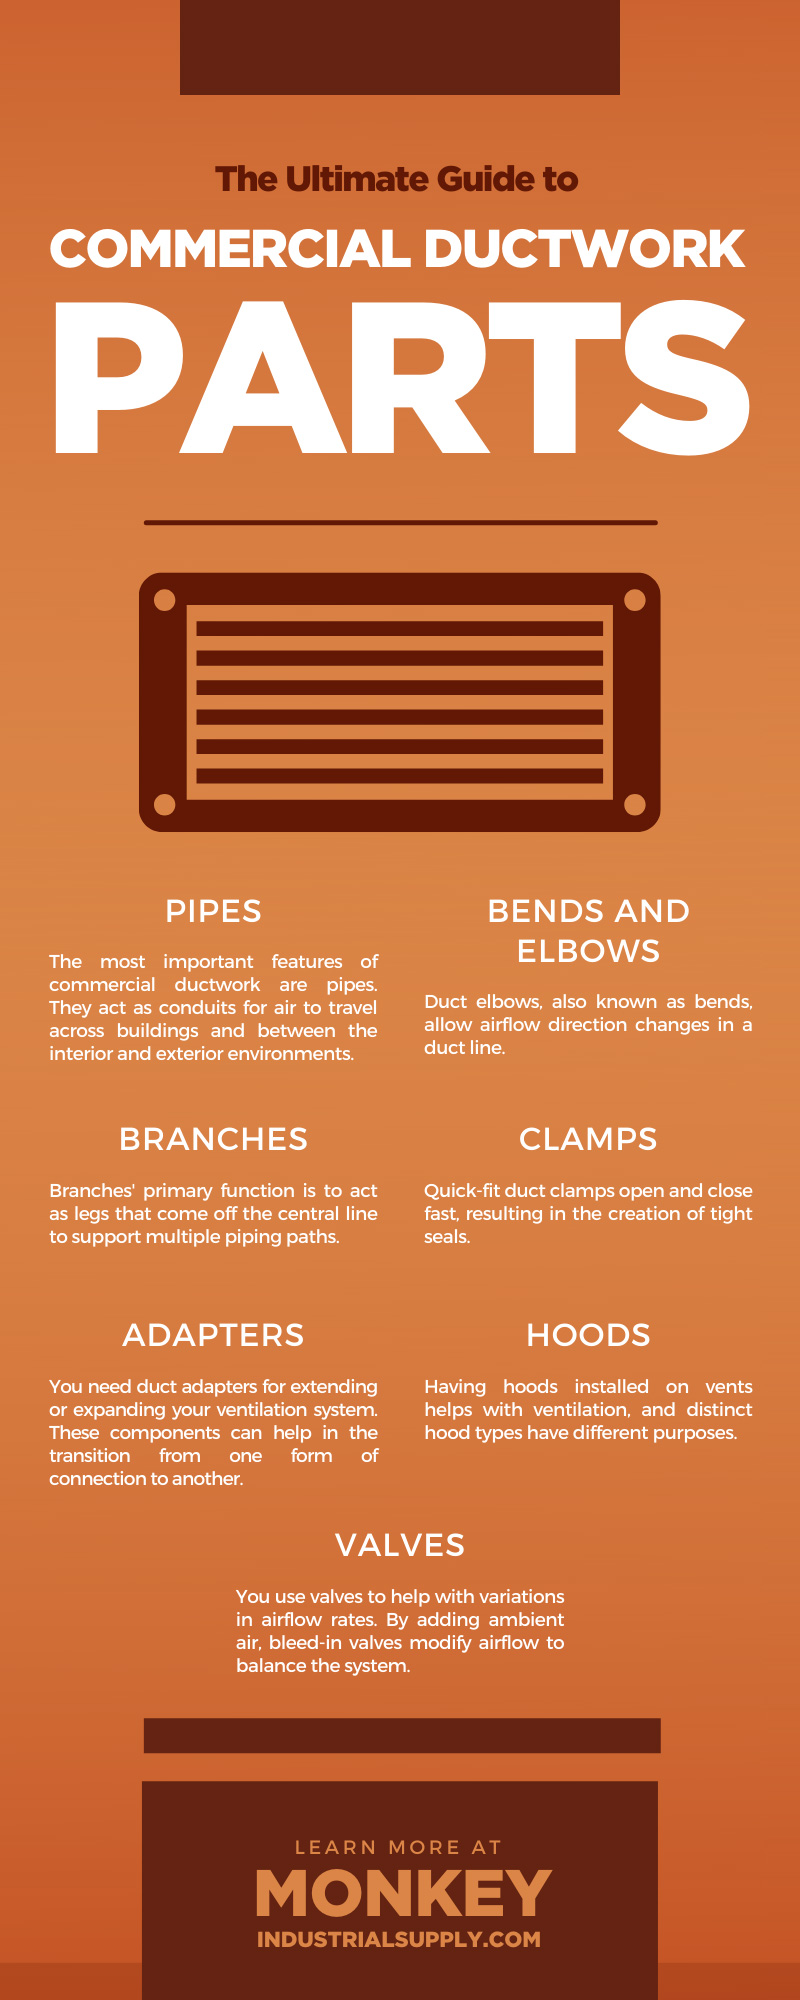 The Ultimate Guide to Commercial Ductwork Parts